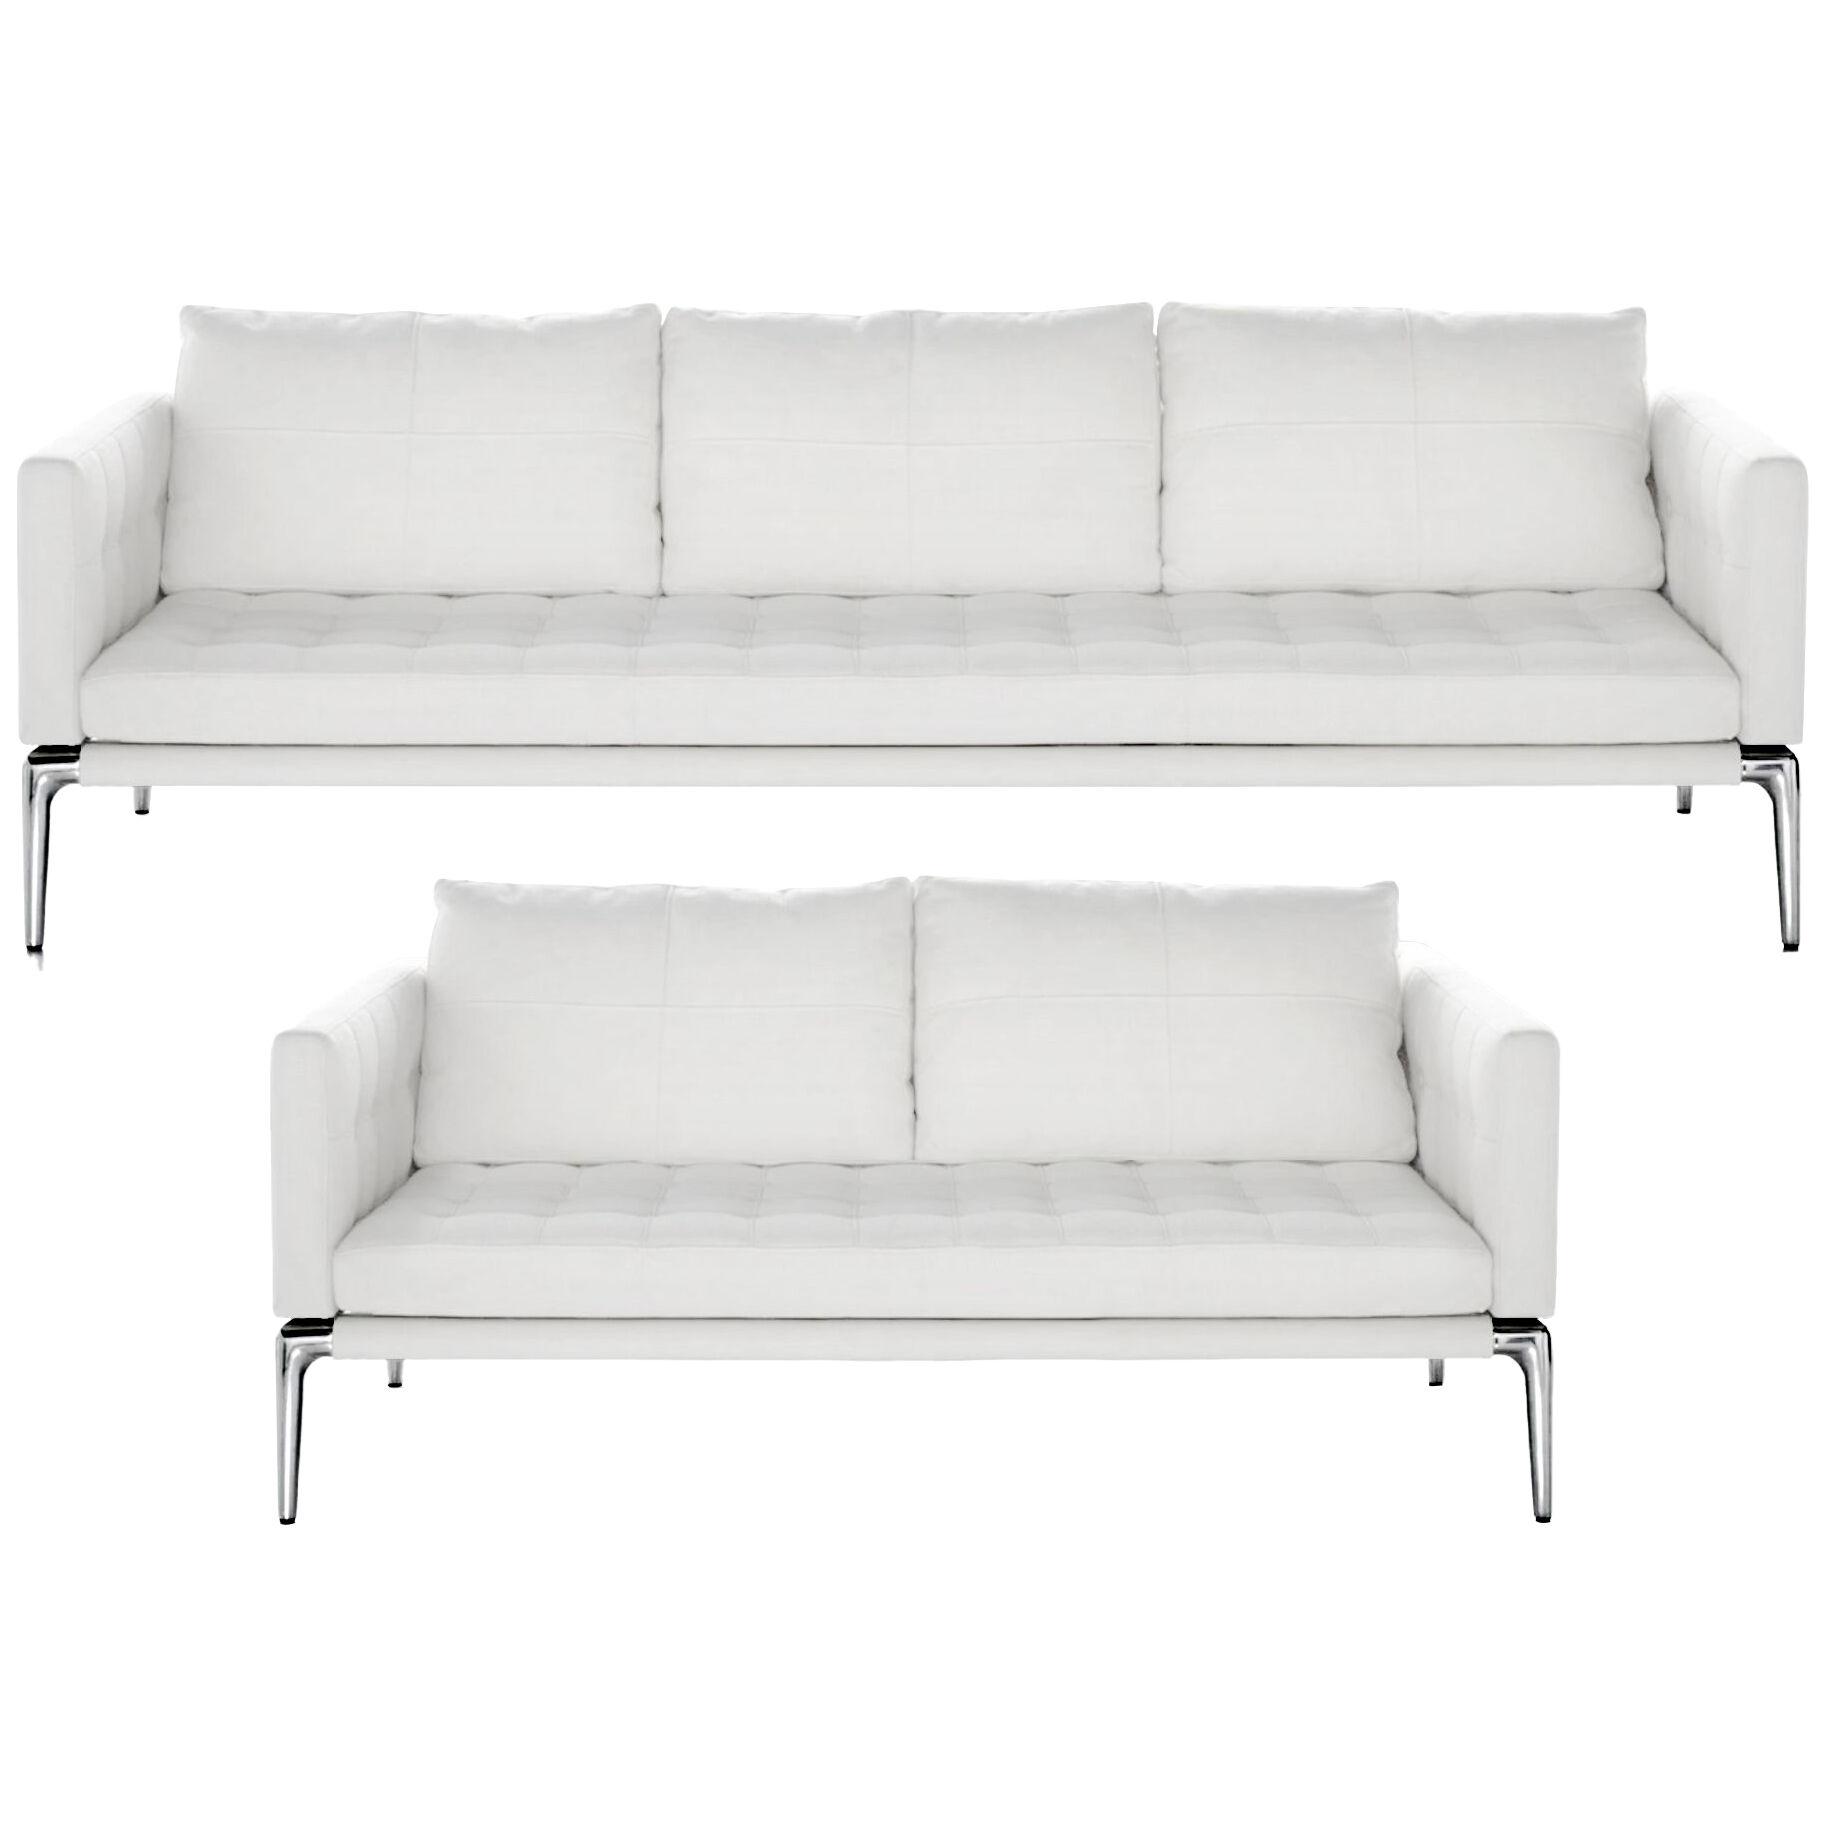 Cassina & Philippe Starck - Pair Of Volage White Leather Sofas